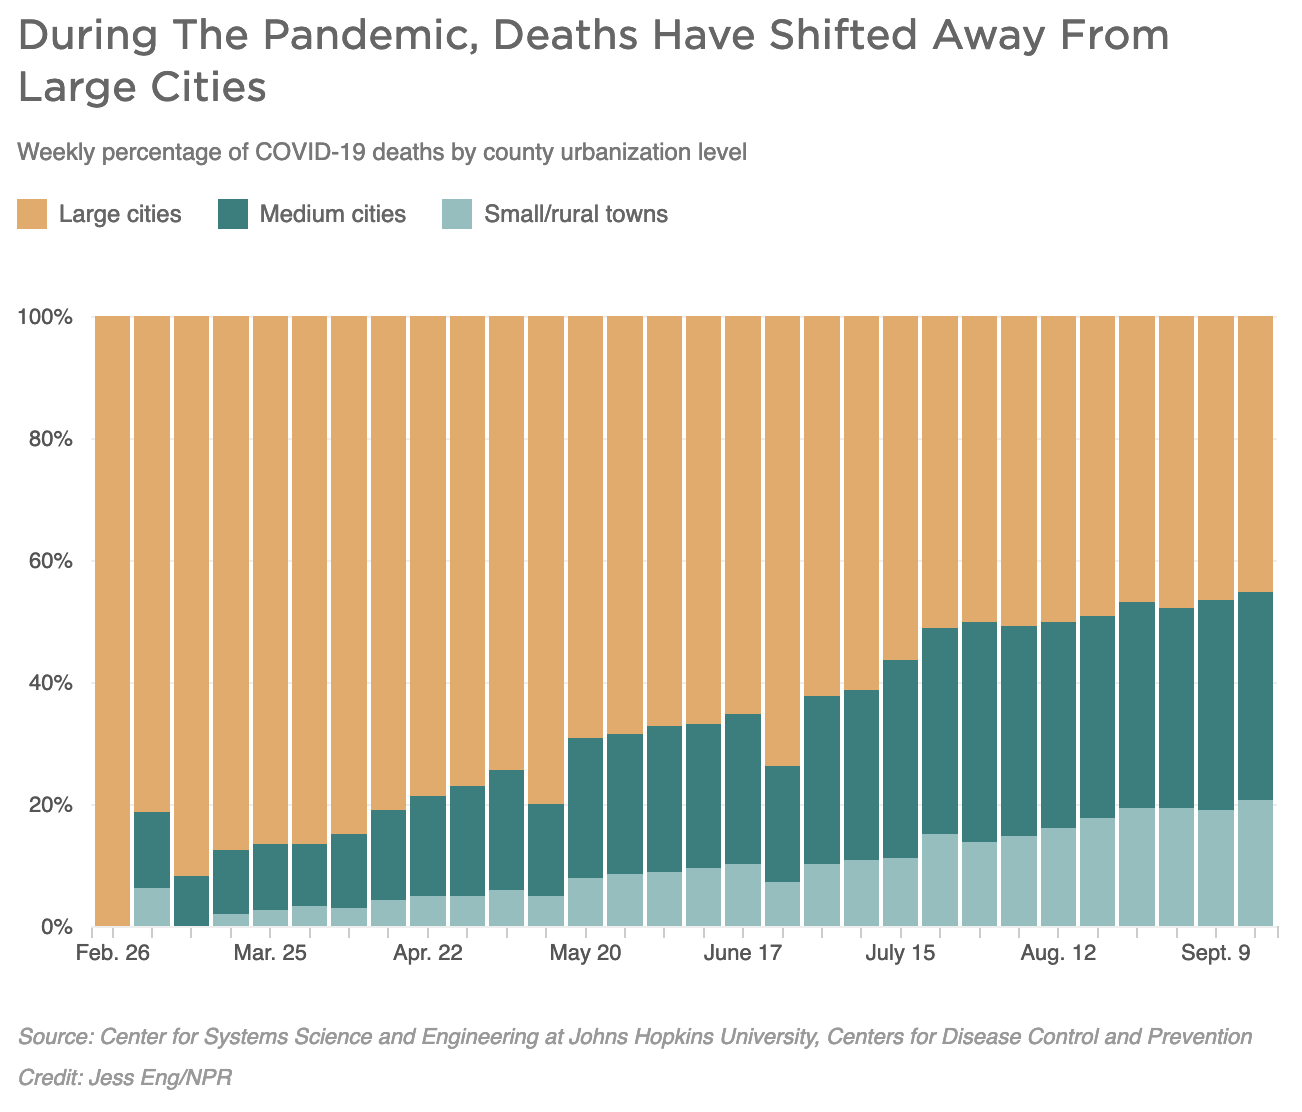 A stacked bar chart from NPR showing how deaths related to Covid-19 have shifted away from urban centers to rural towns over the course of the pandemic.